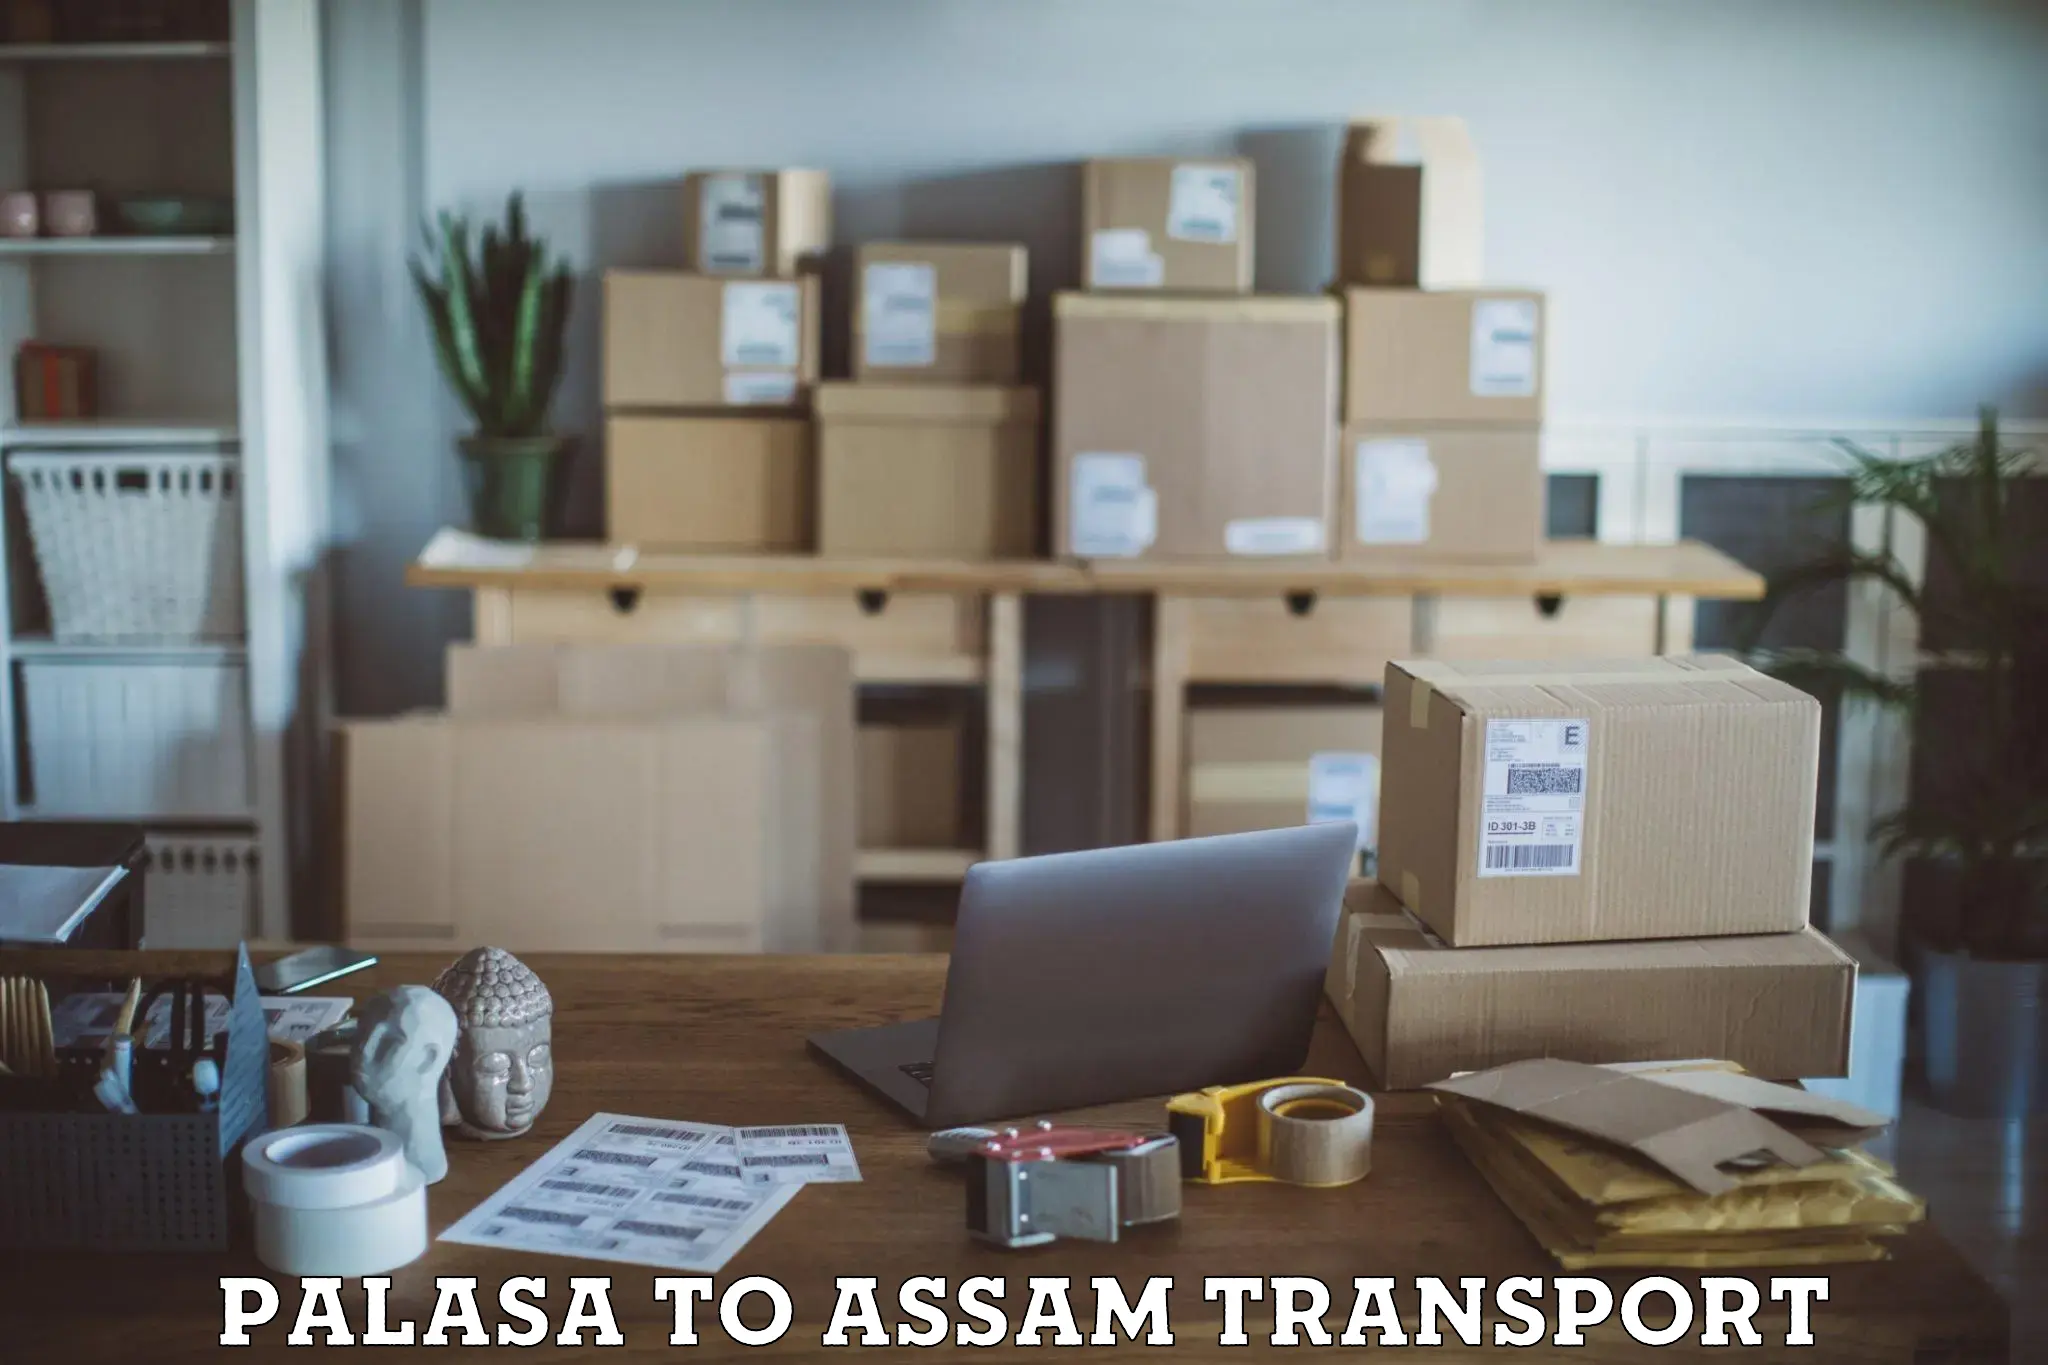 Container transport service Palasa to Assam